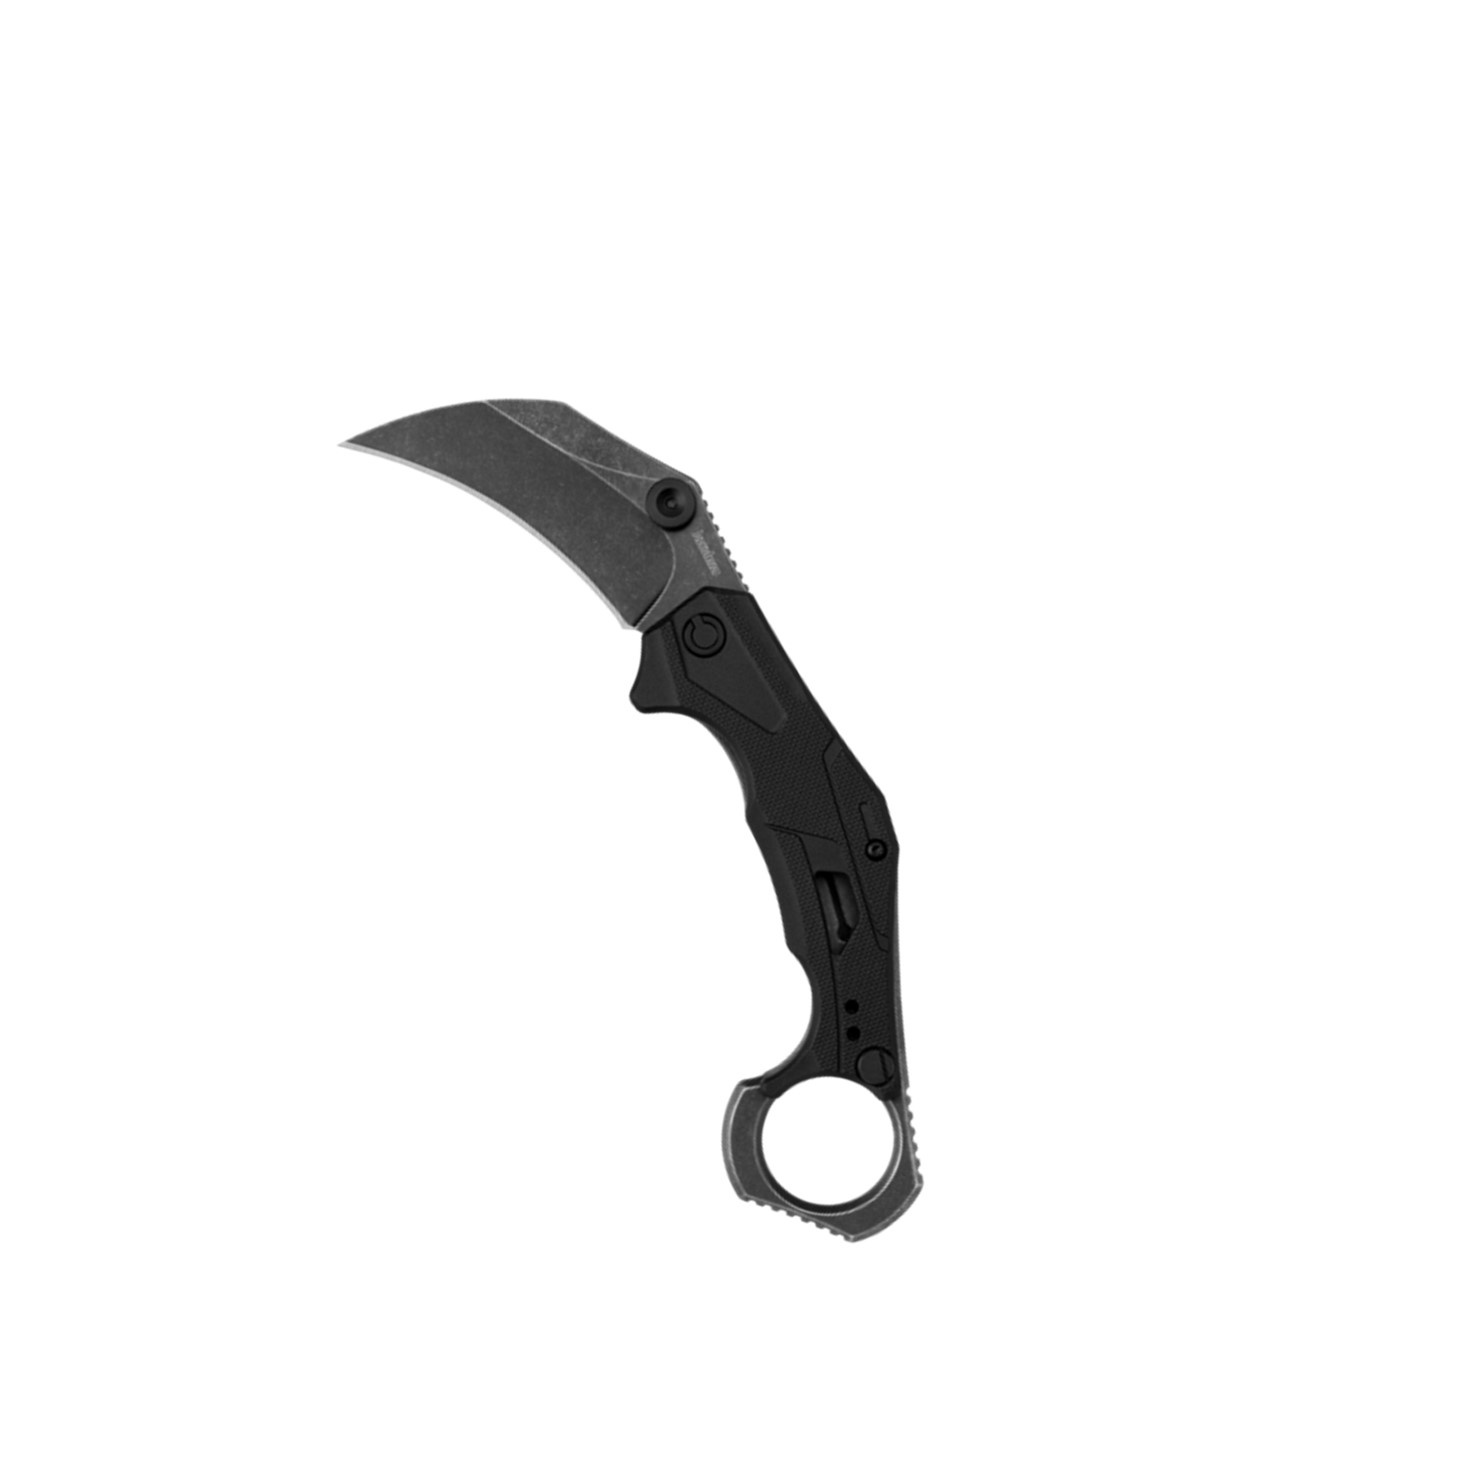 Kershaw Outlier